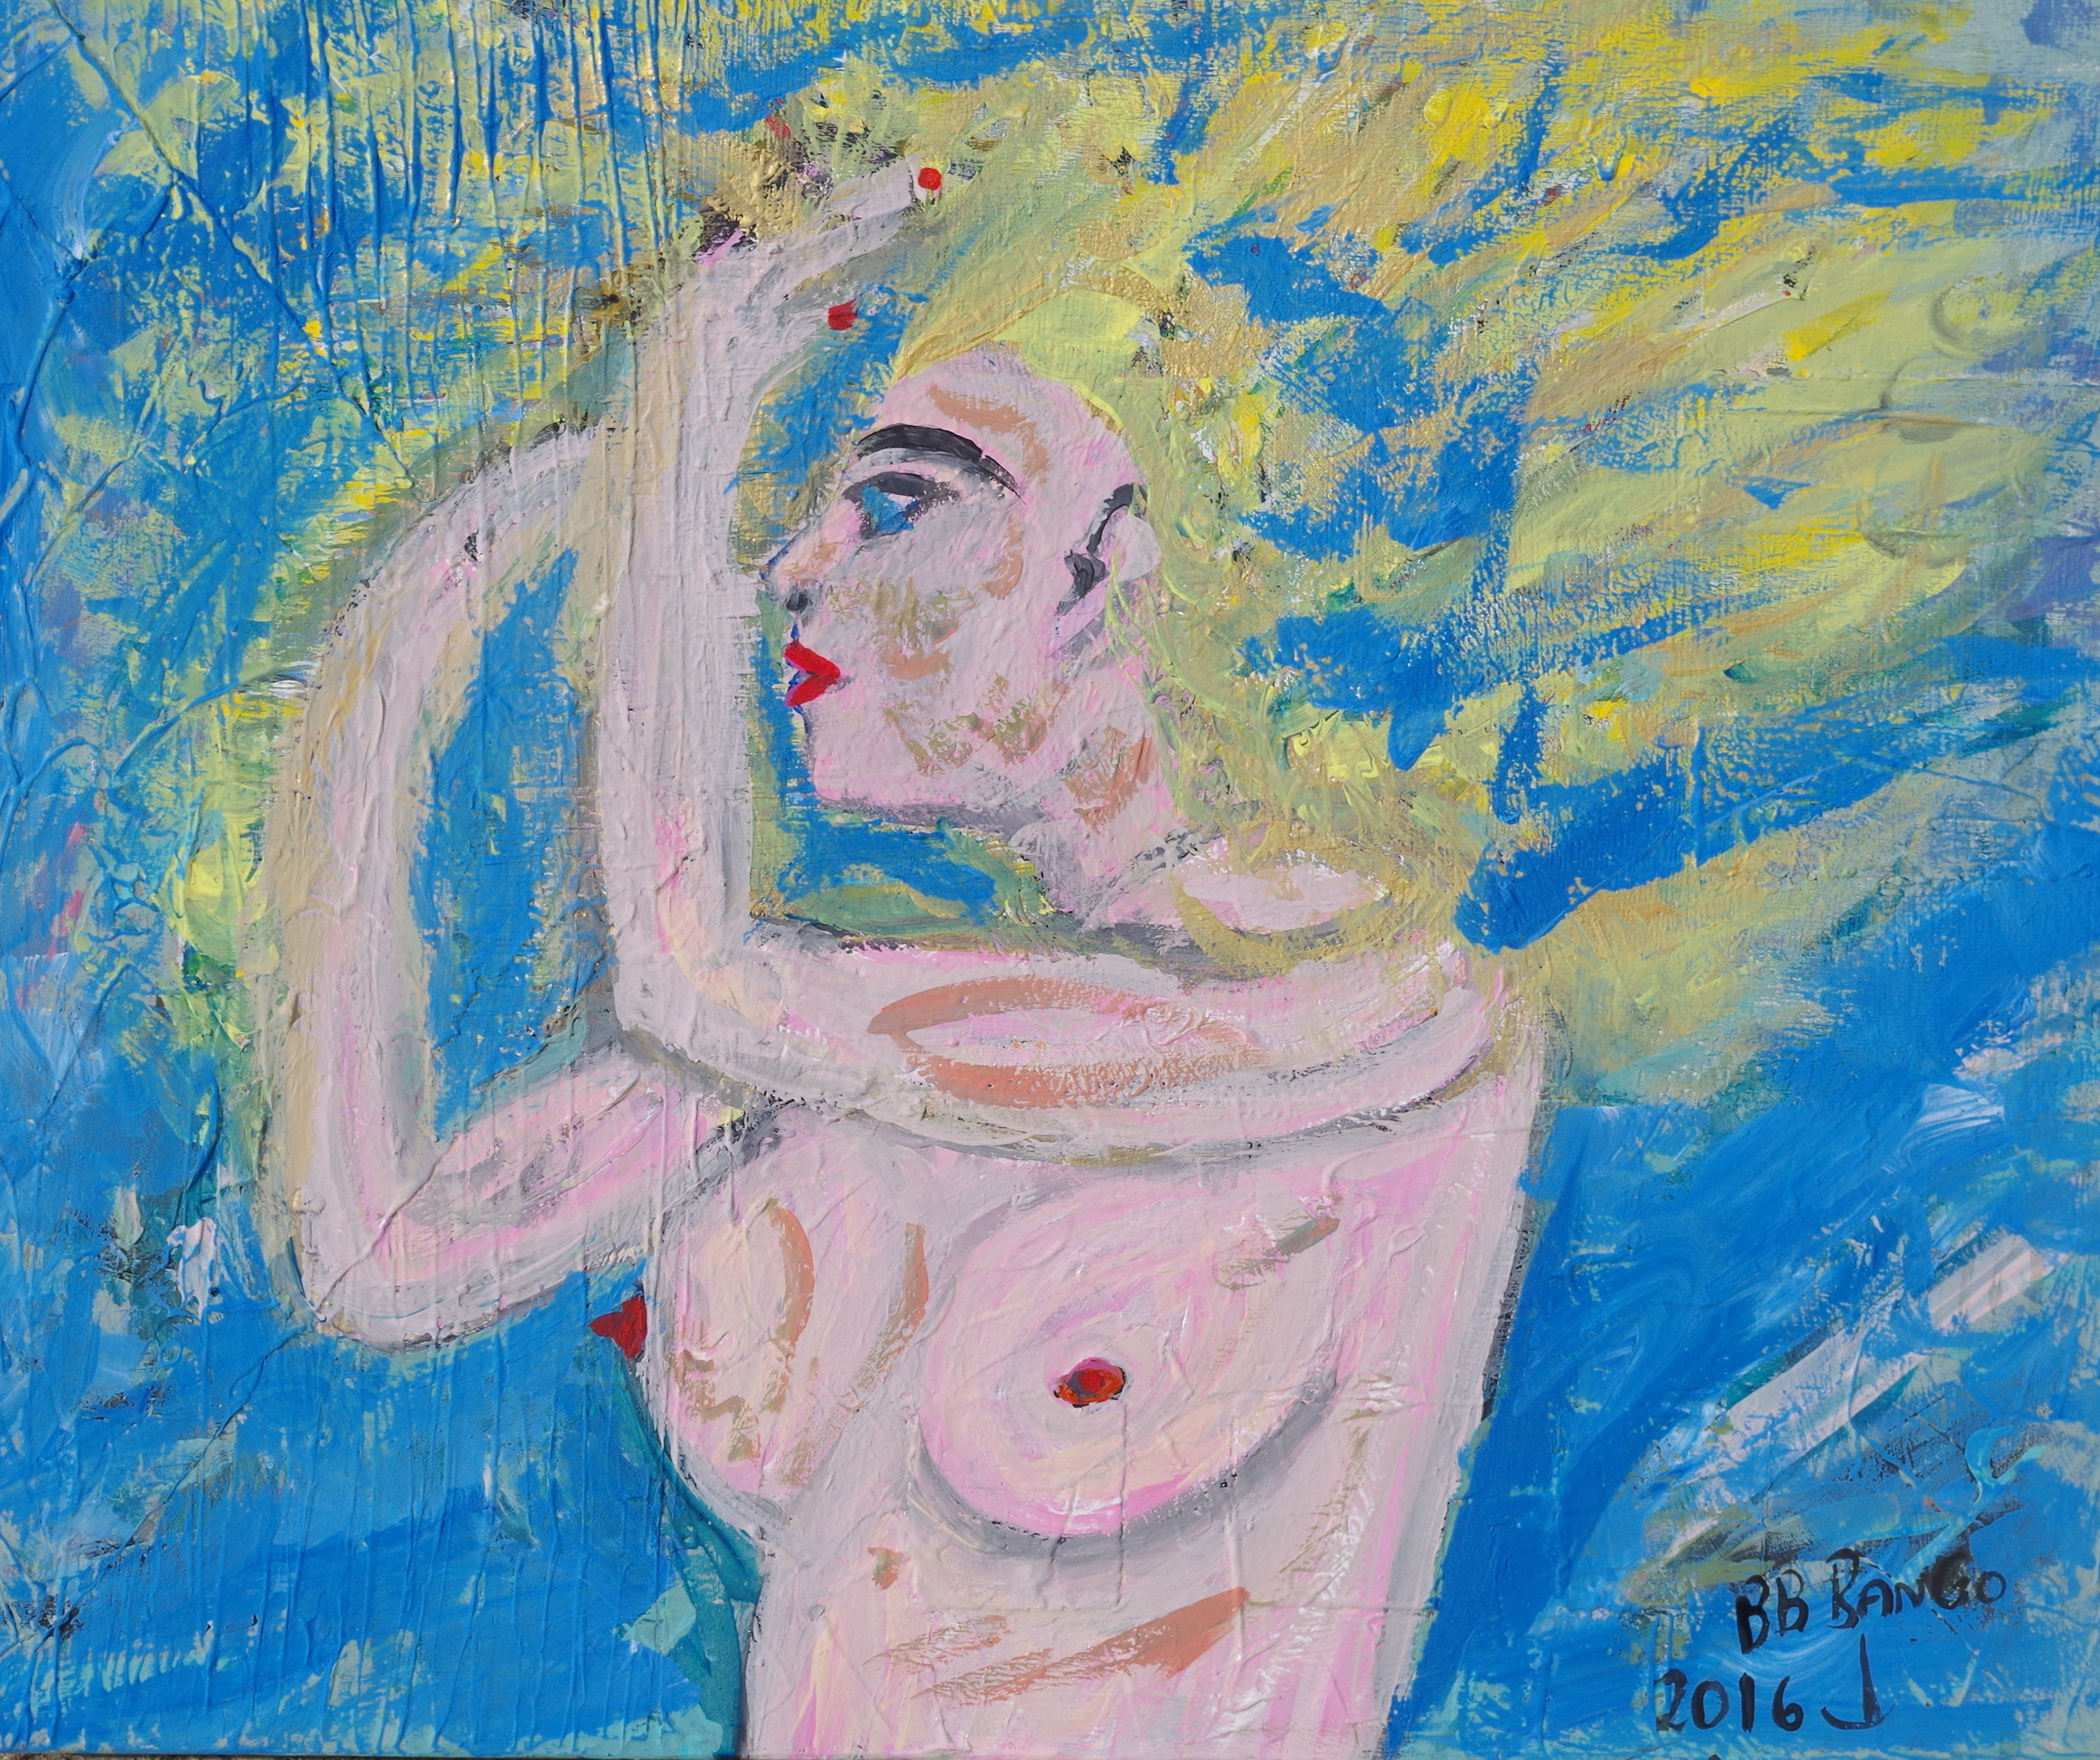 'Windy Hair' by BB Bango based 25 by 25 inch acrylic on canvas. Sold to art collector in UK